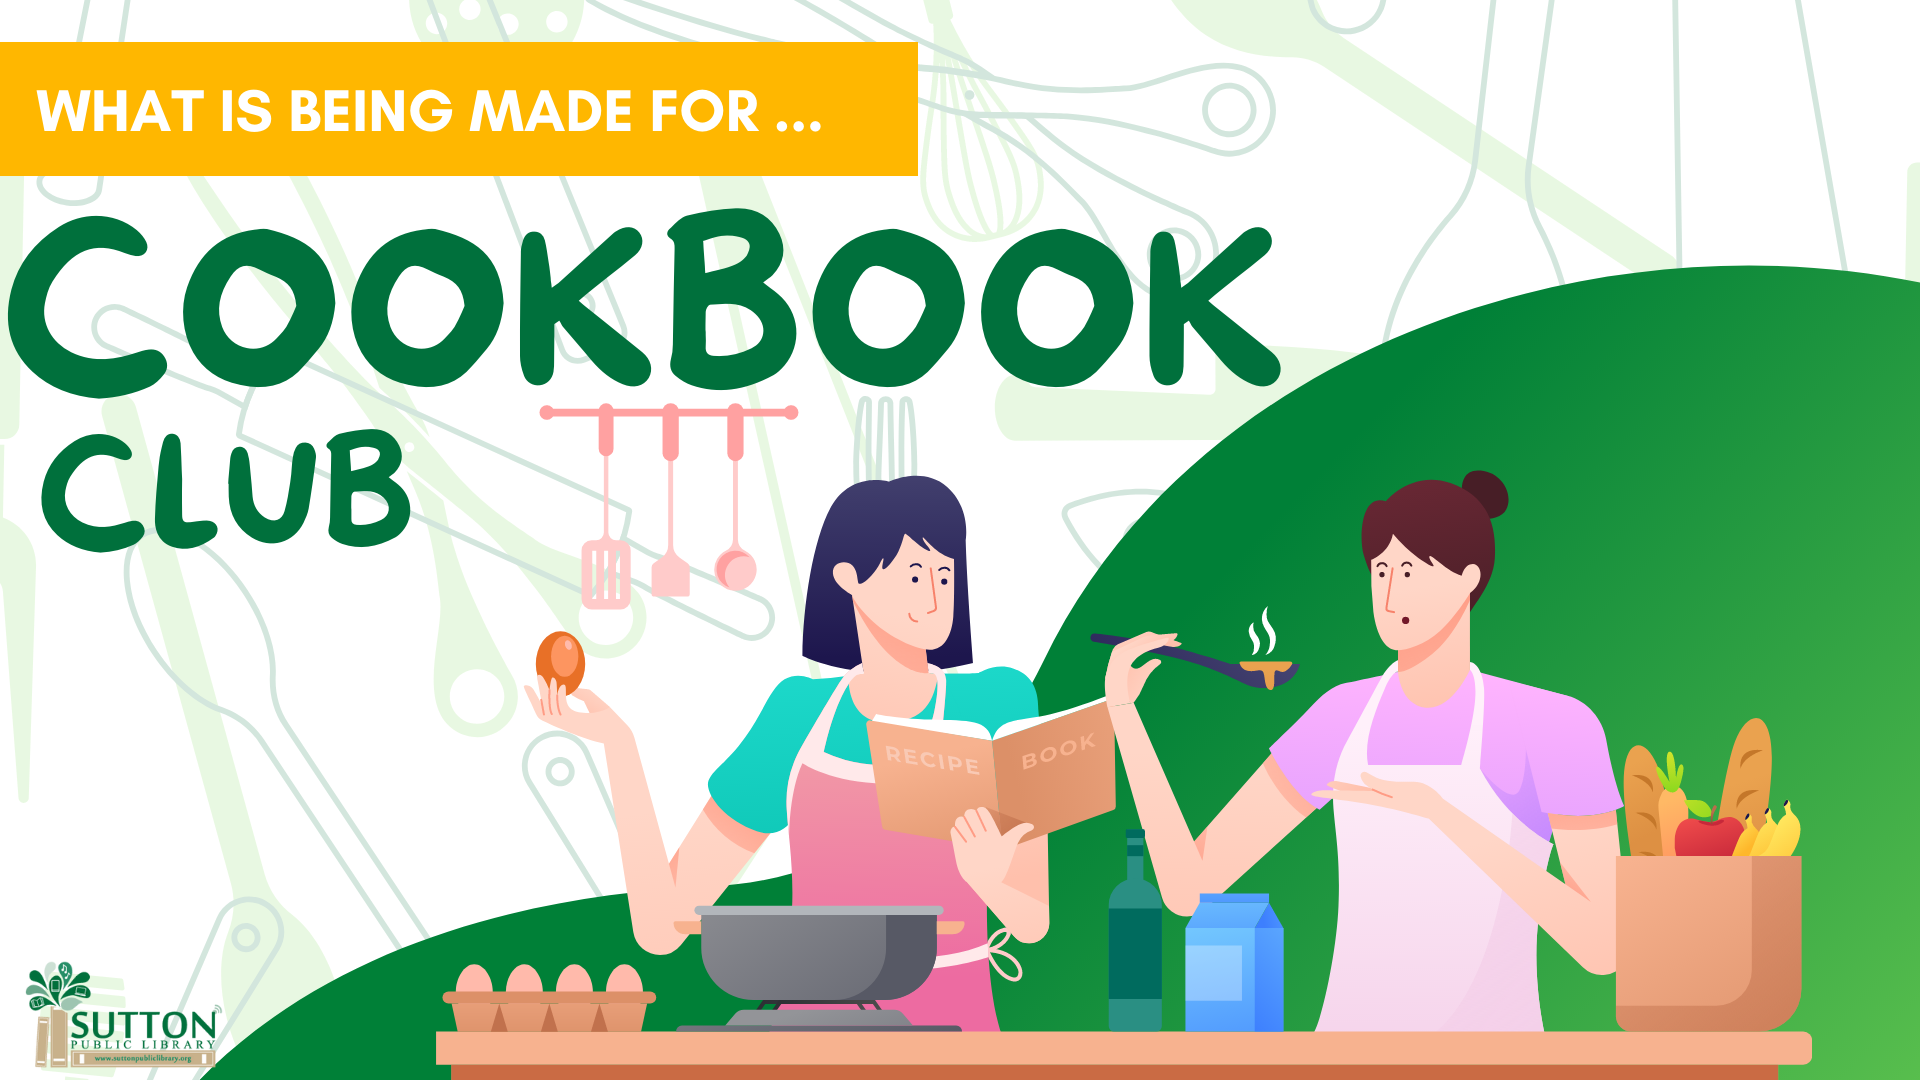 What is begin made for Cookbook Club?